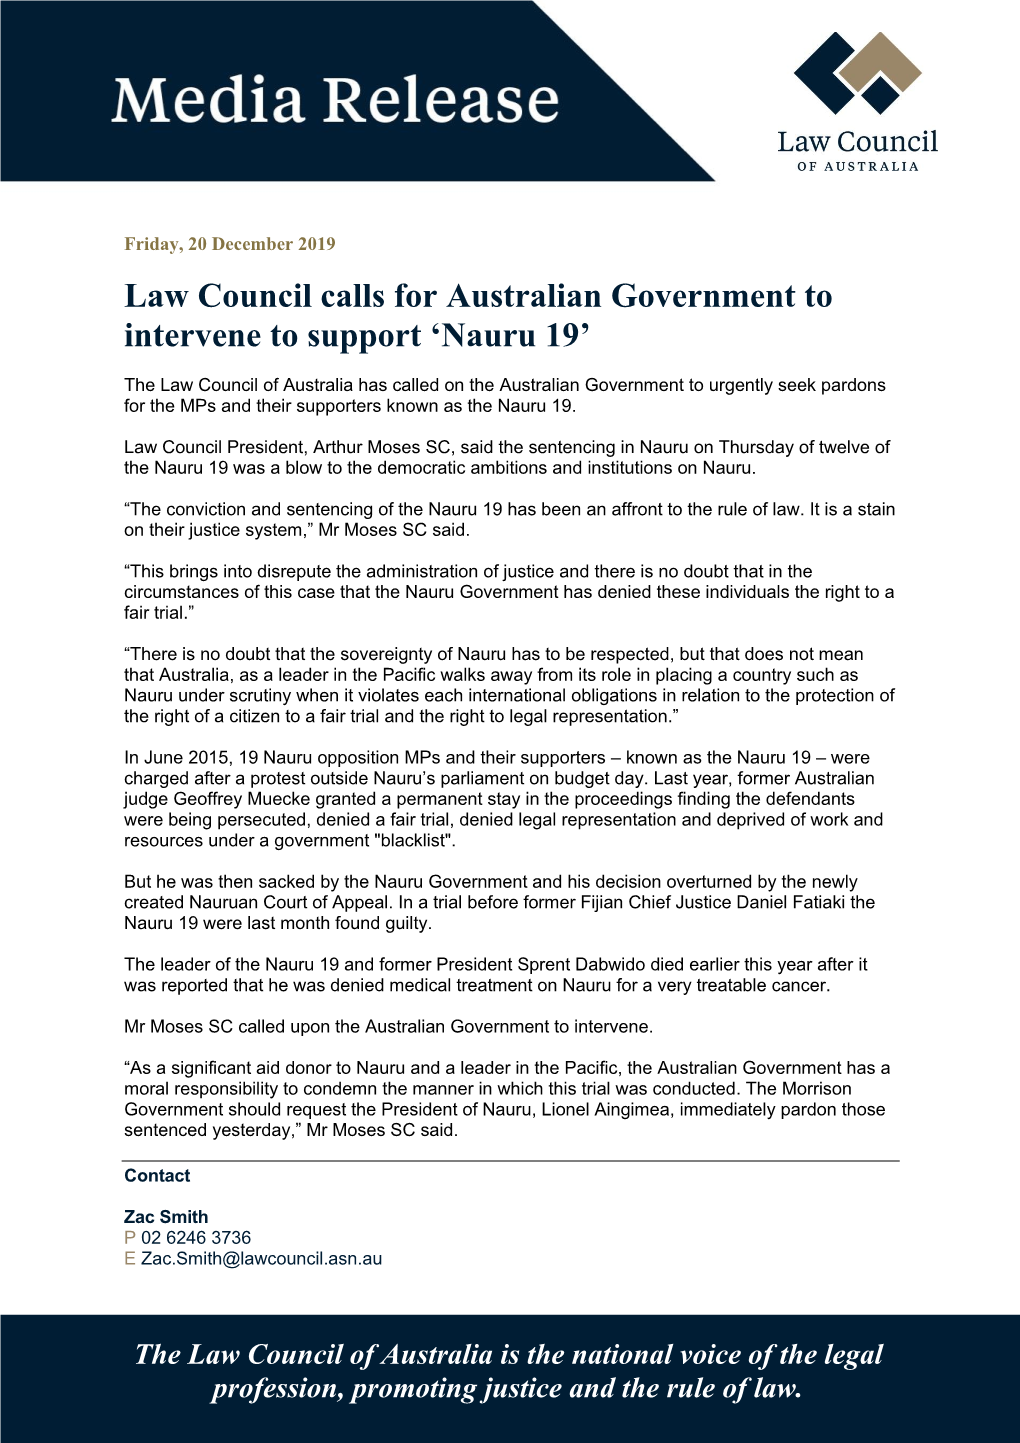 Law Council Calls for Australian Government to Intervene to Support ‘Nauru 19’